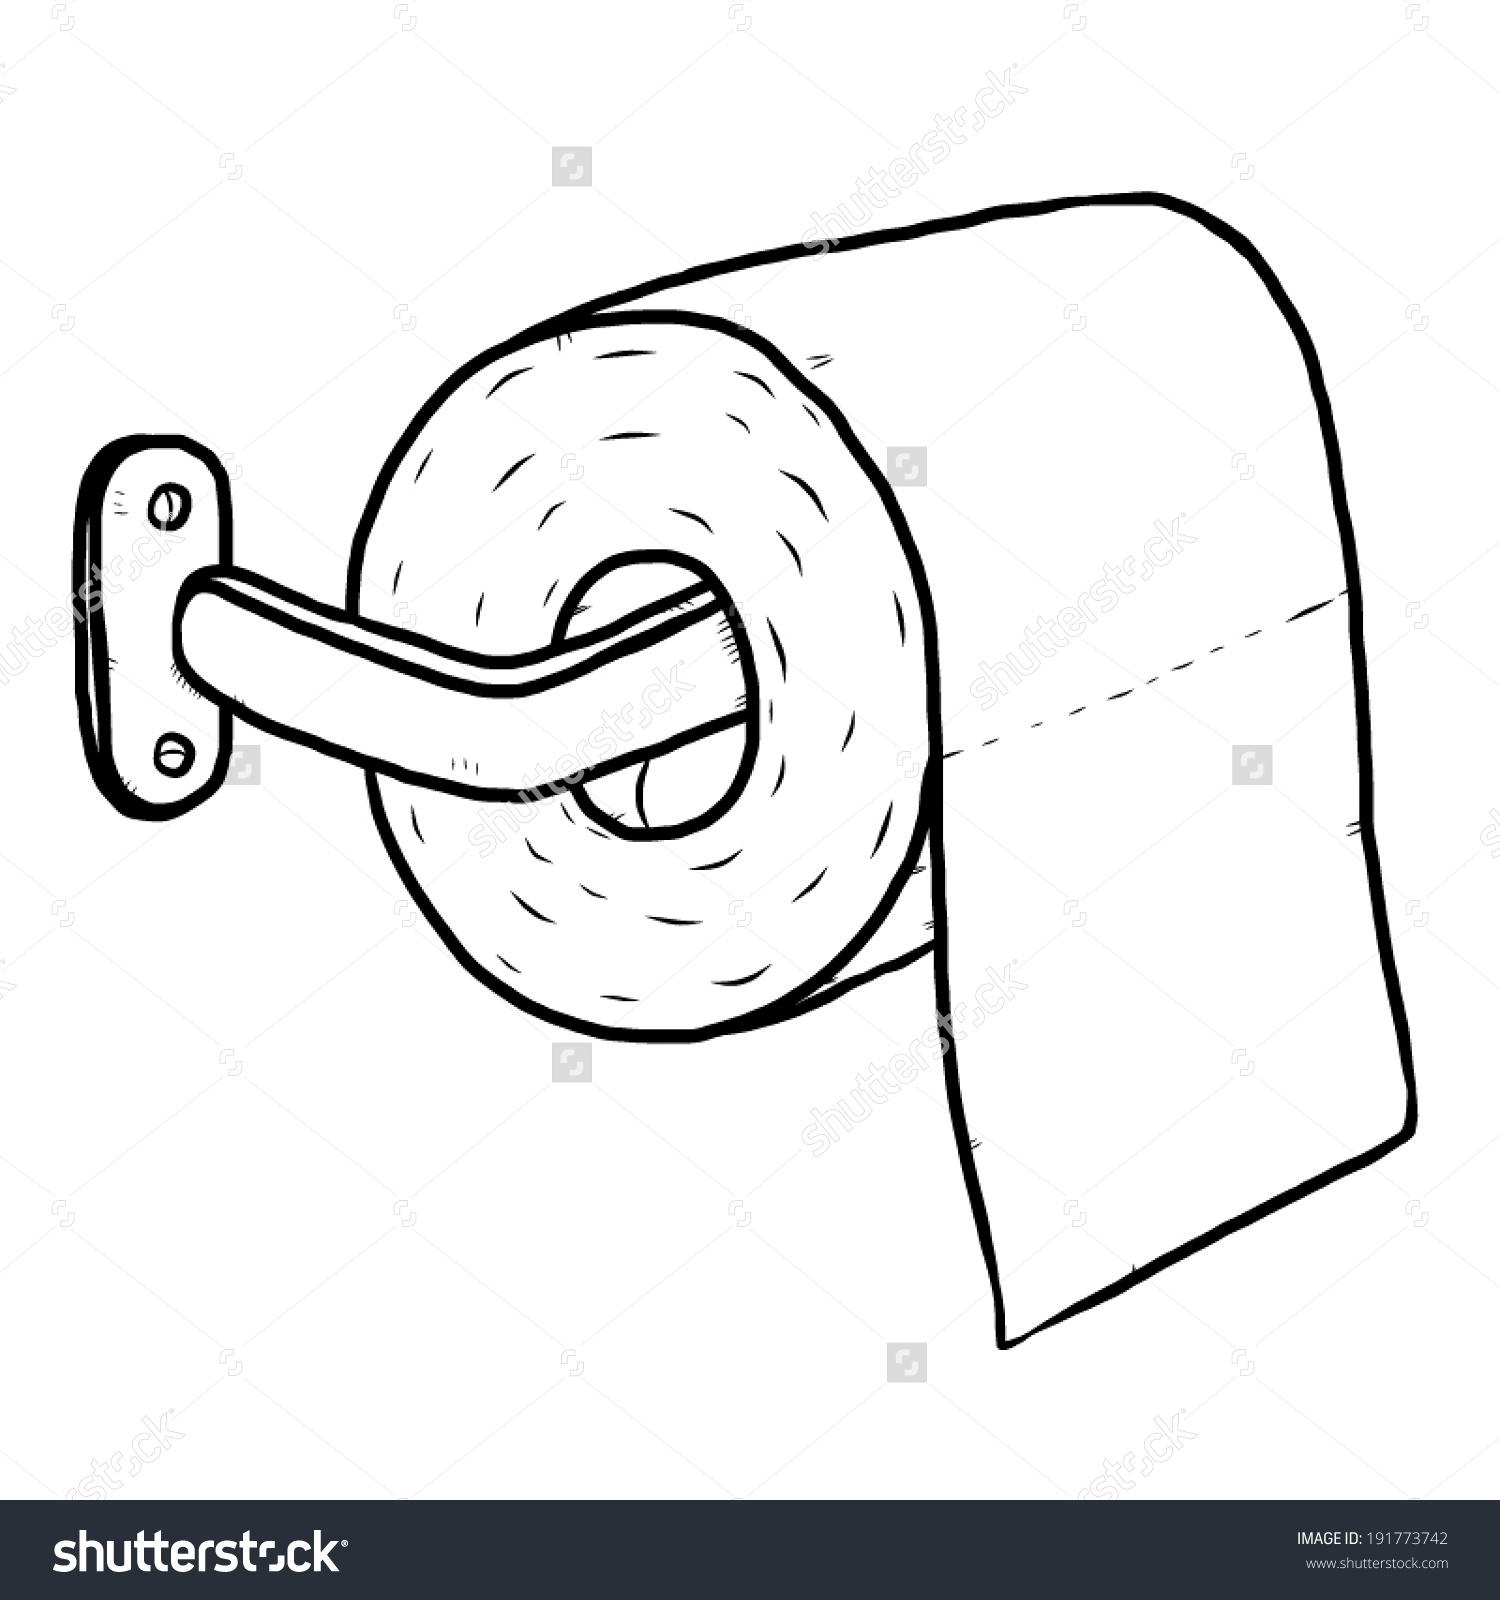 toilet roll clipart - photo #47